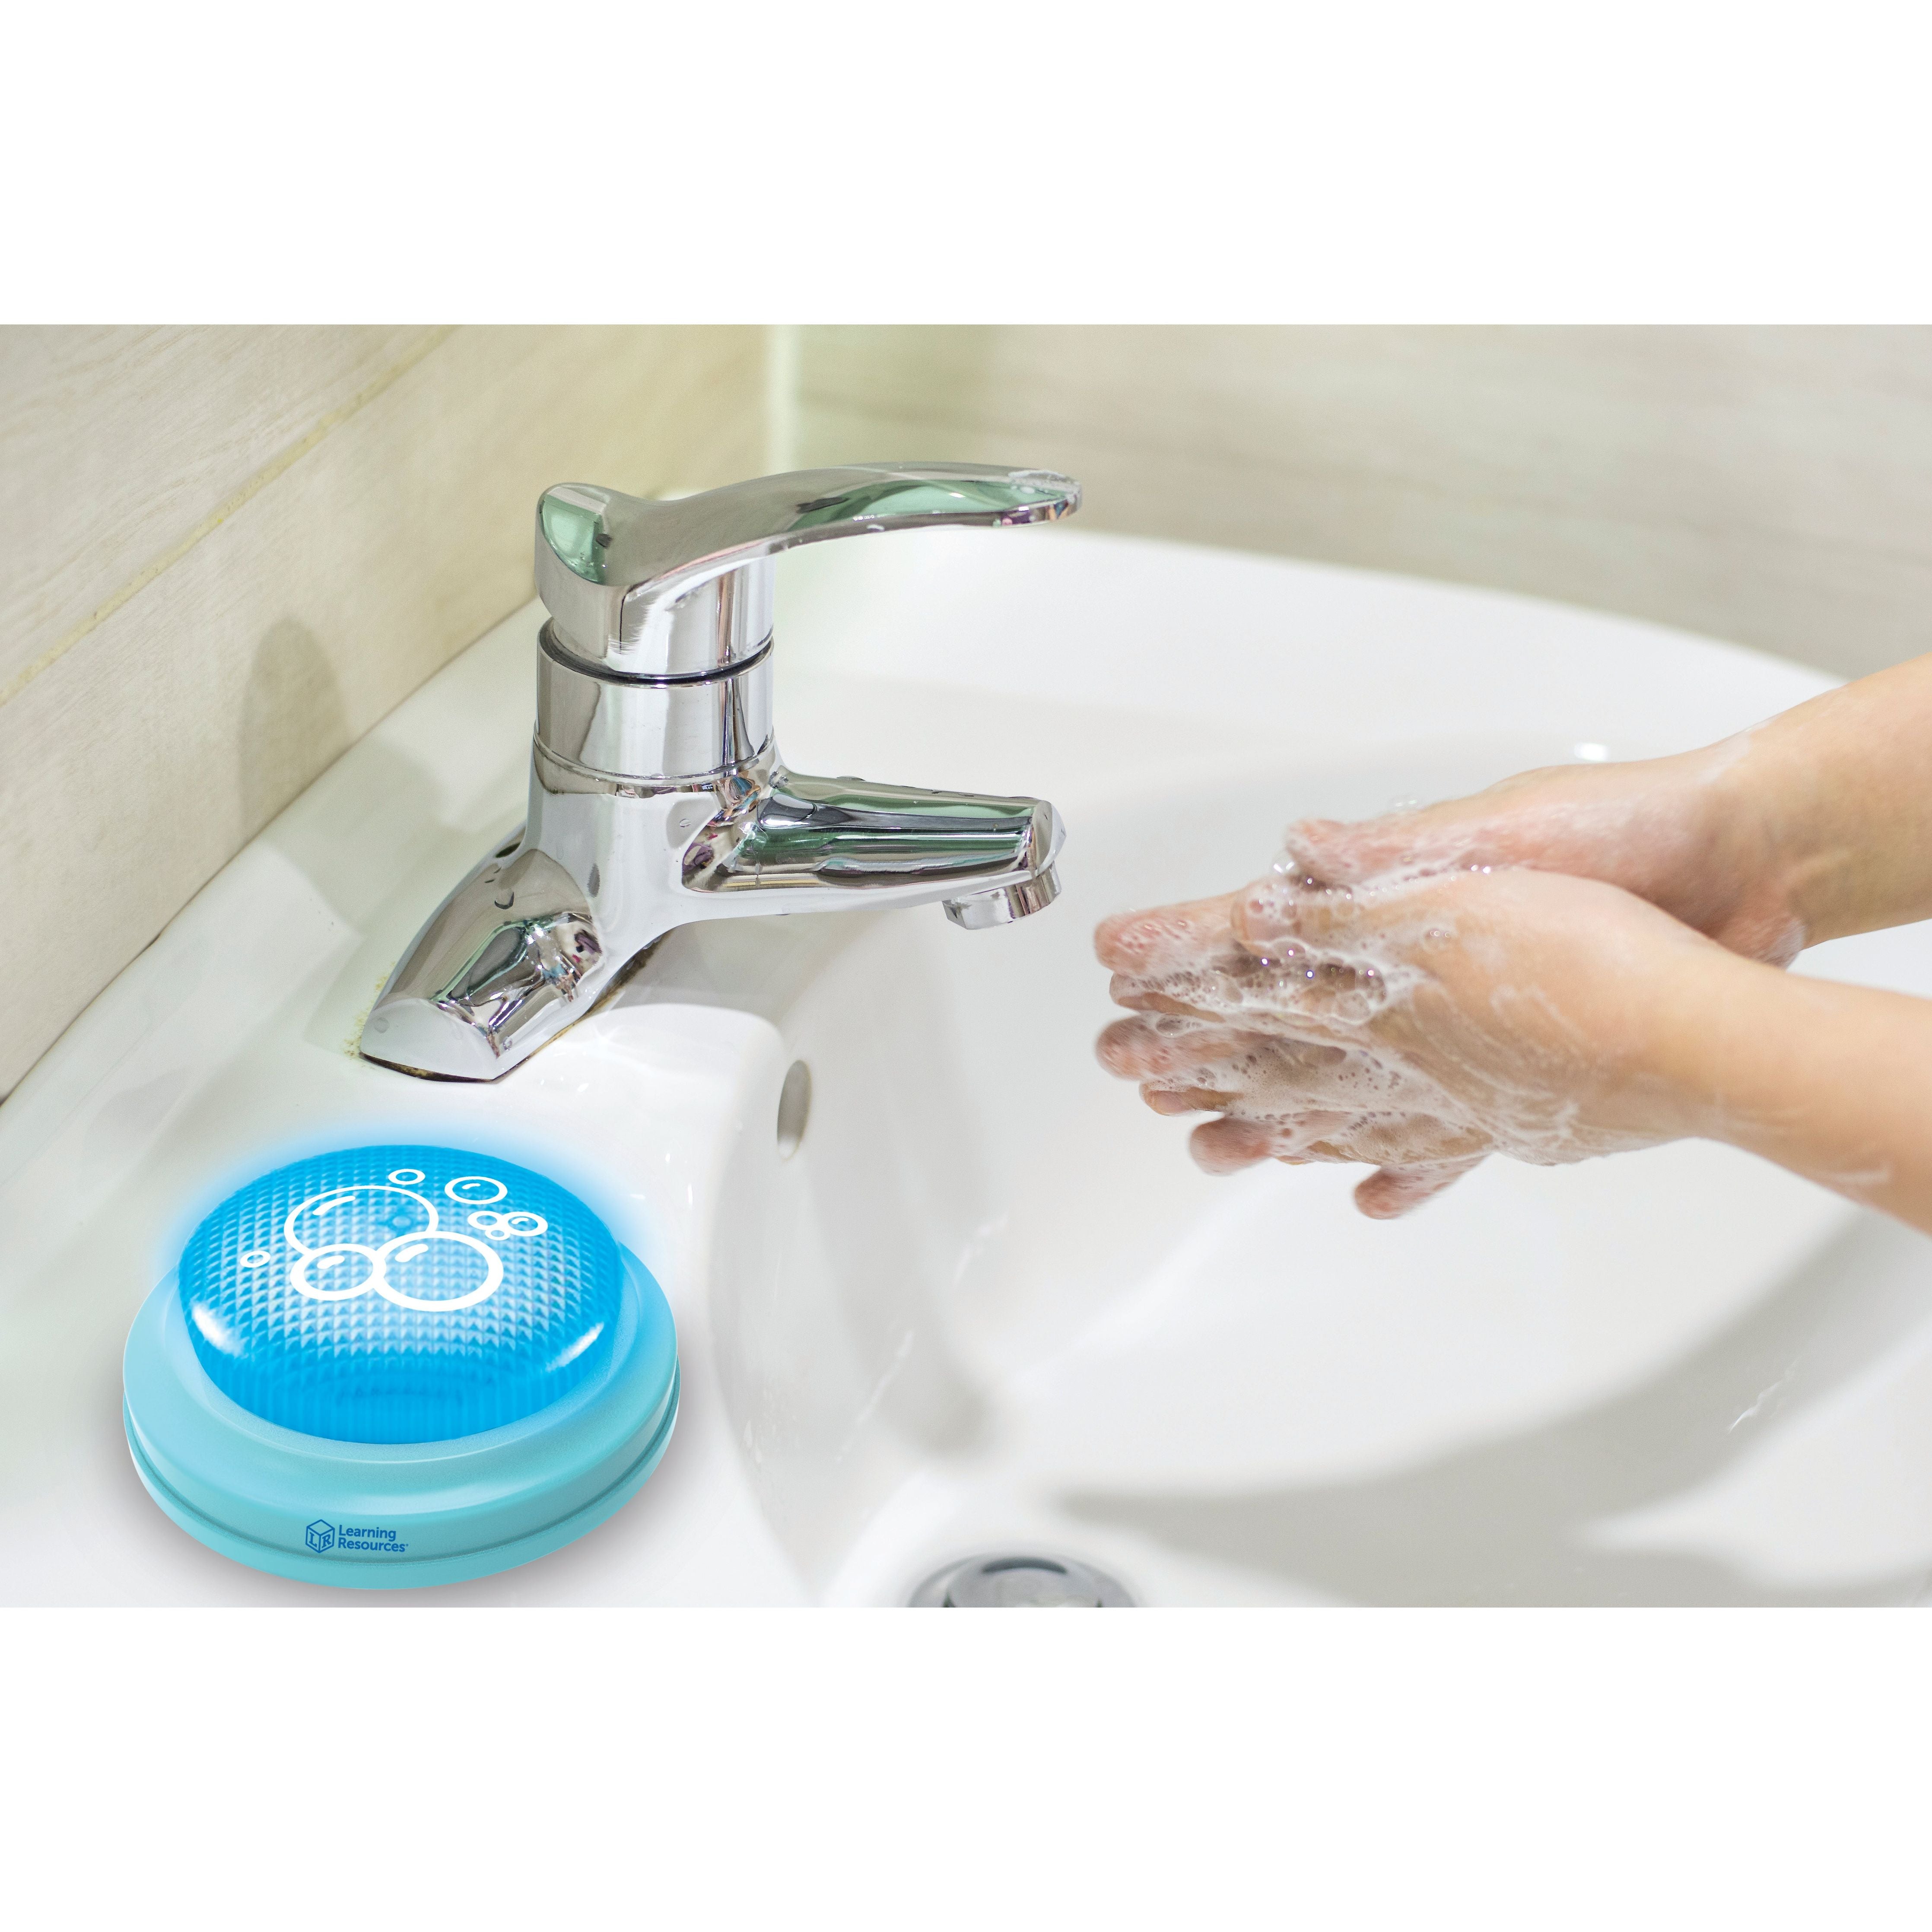 20 Second Hand Washing Timer `